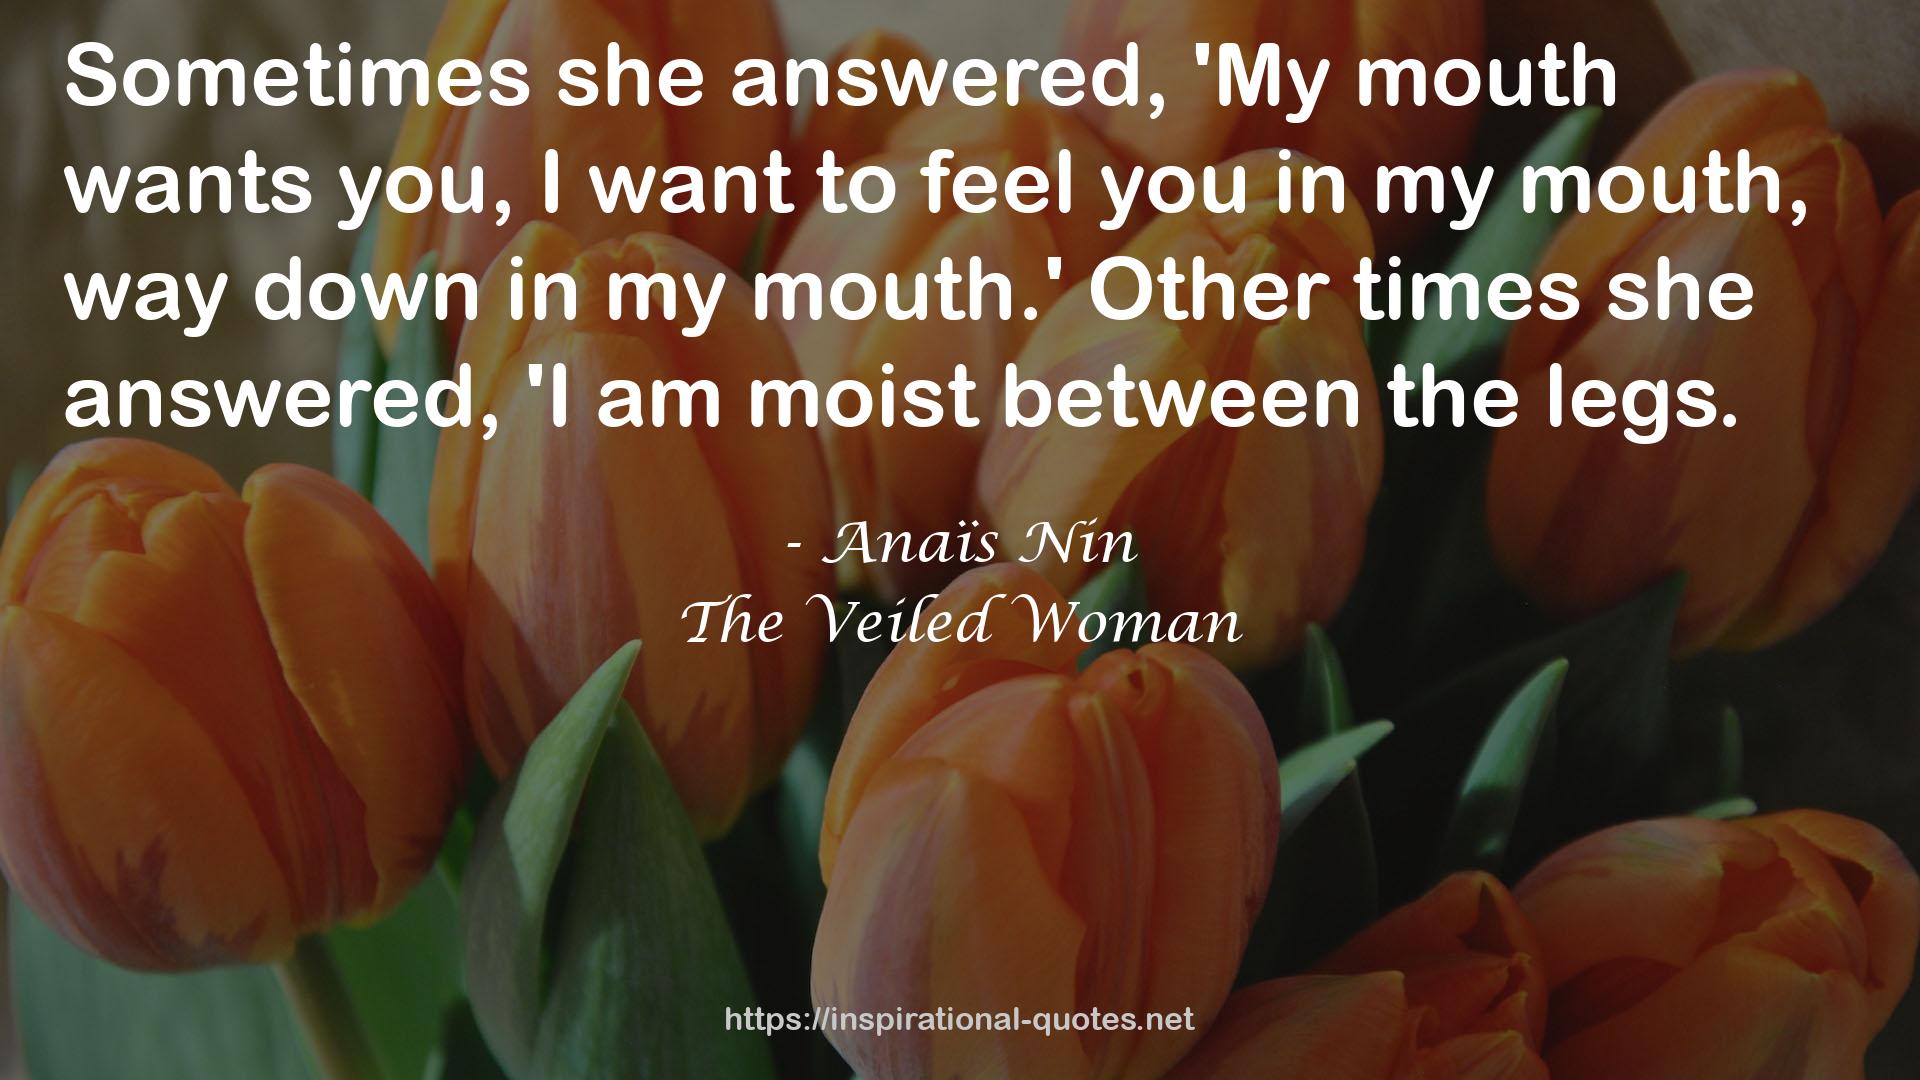 The Veiled Woman QUOTES